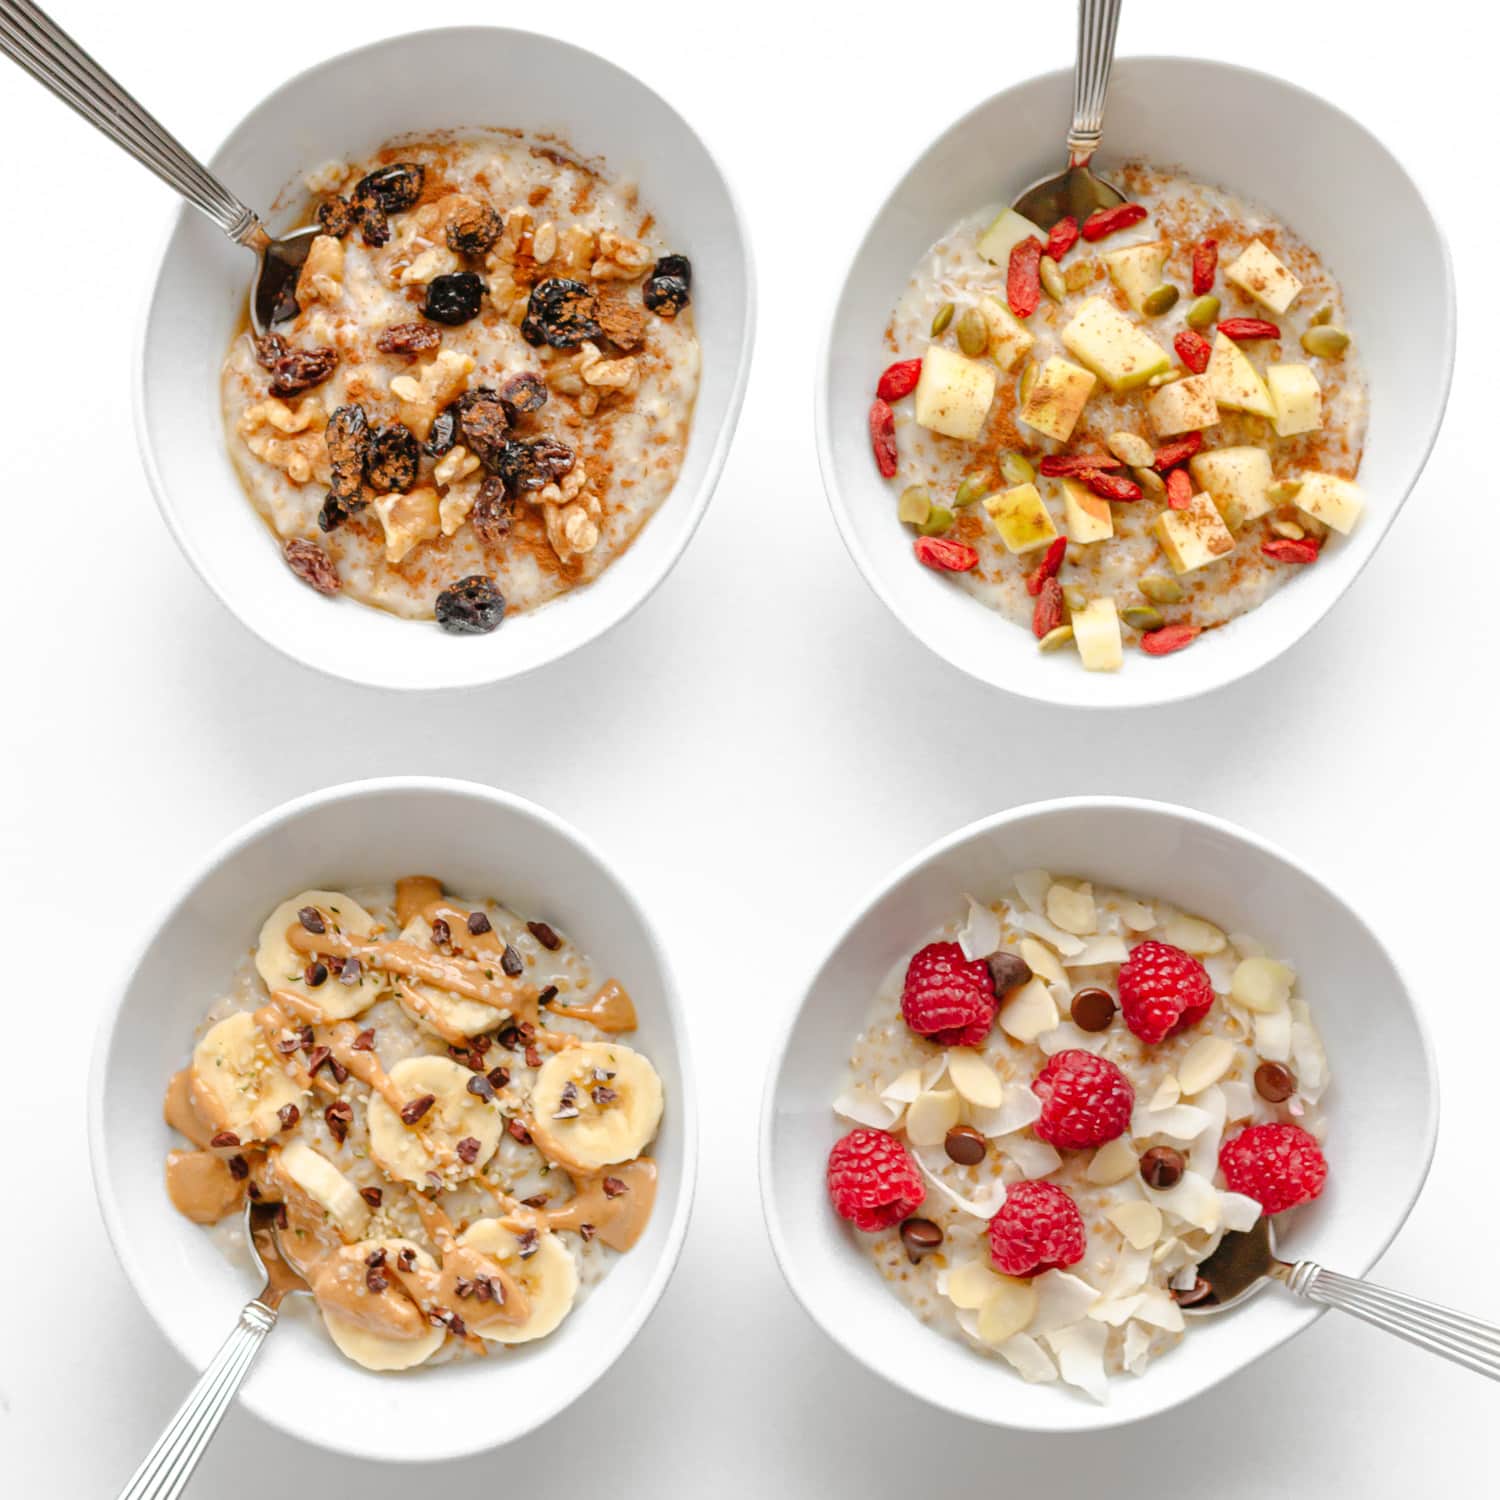 Four bowls of steel cut oats with different toppings.